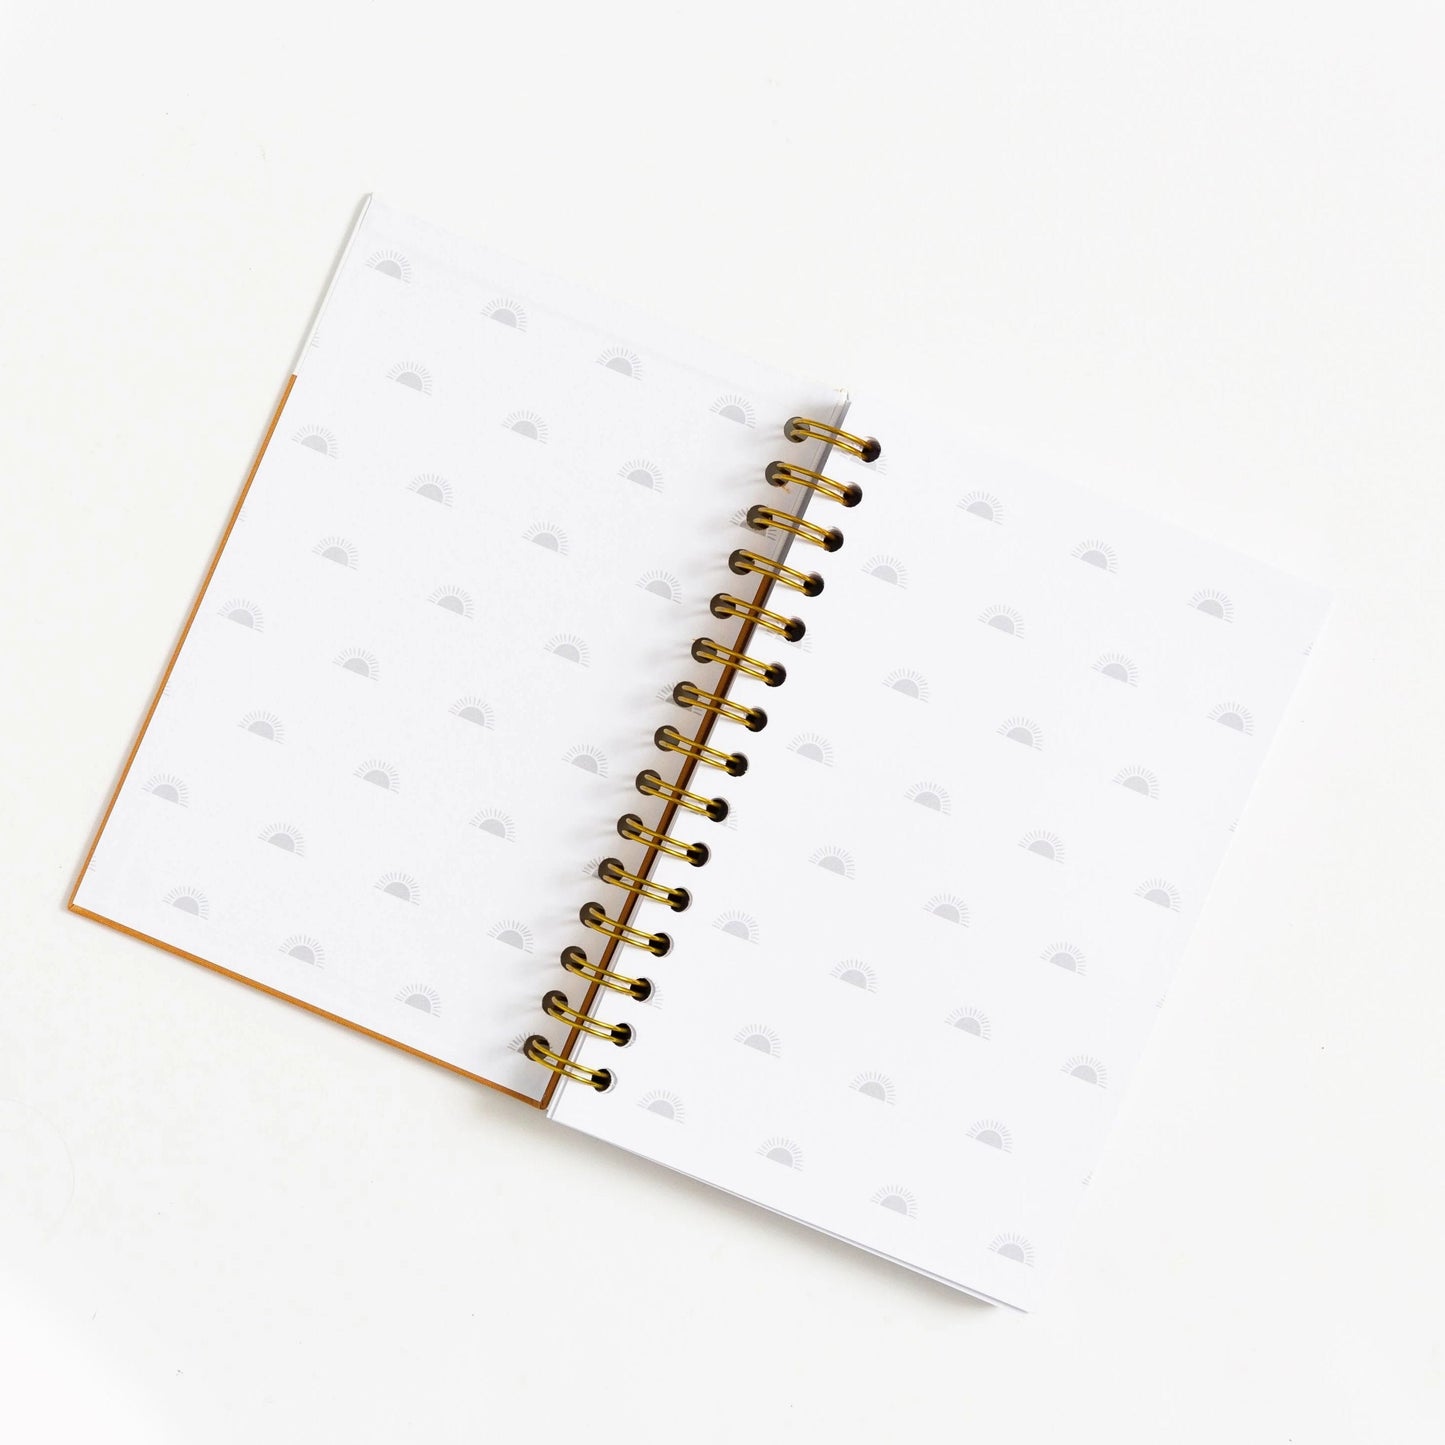 Gratitude Journal - Amber Linen by Promptly Journals